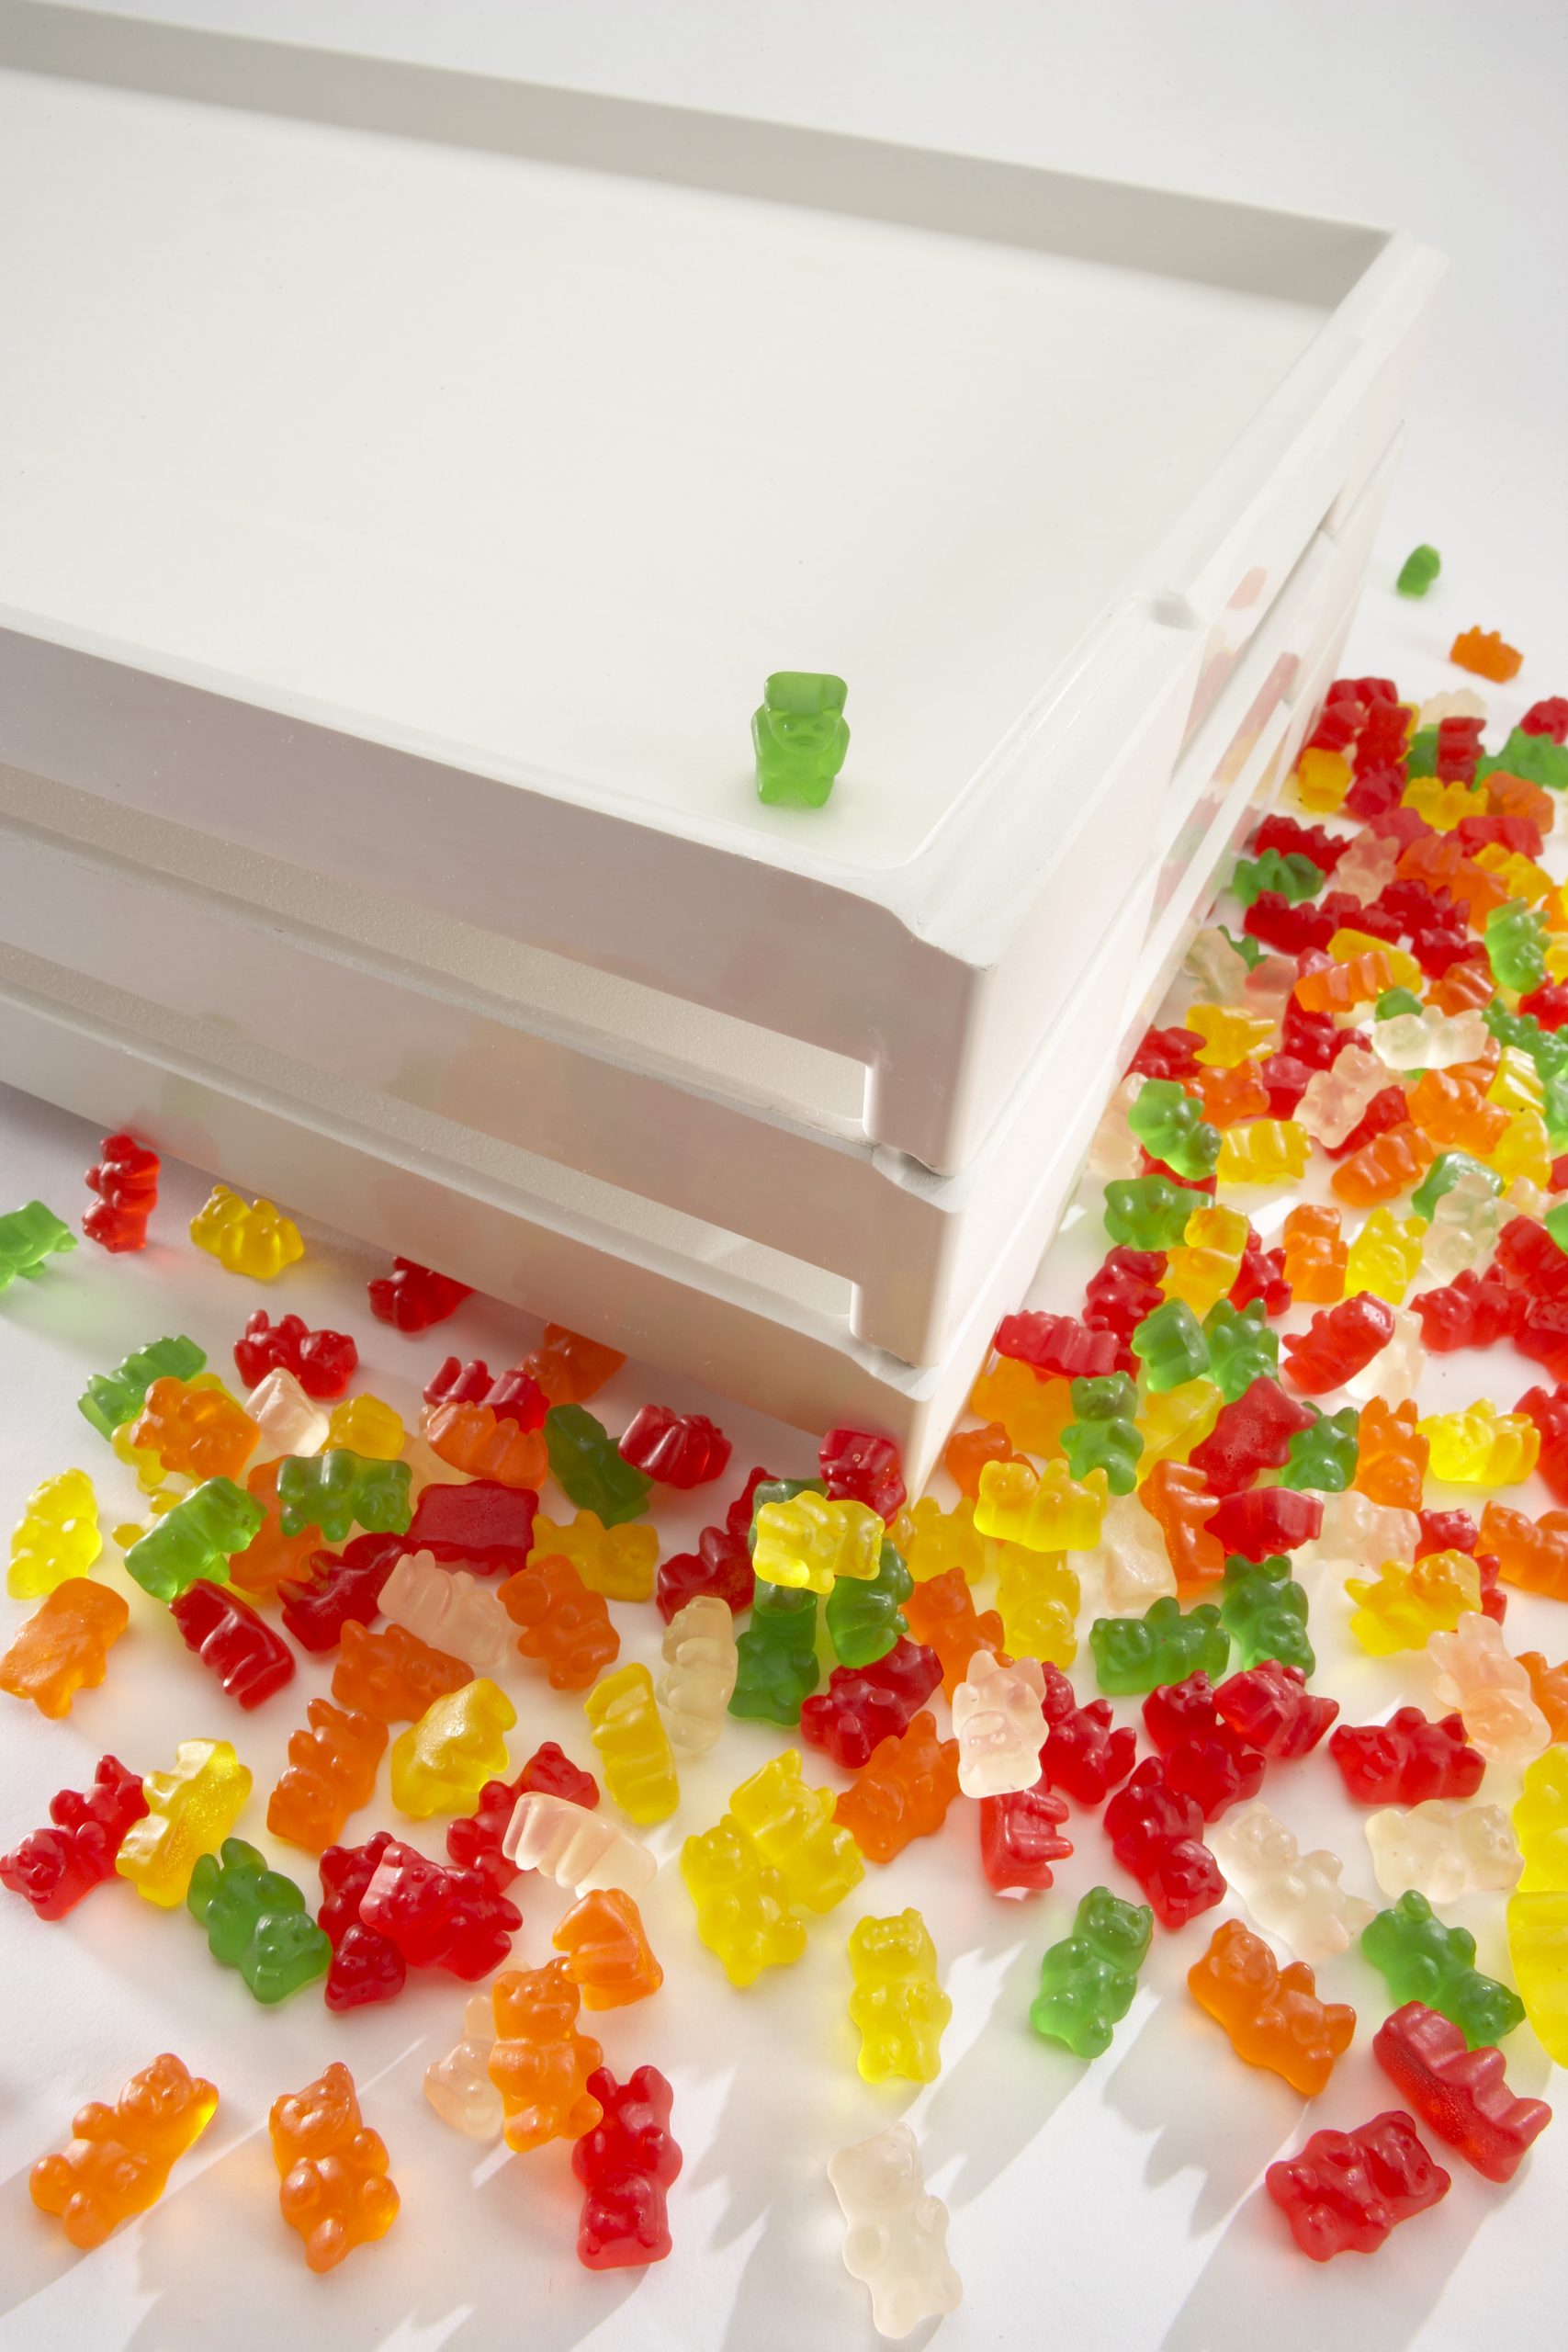 Overcoming confectionery challenges